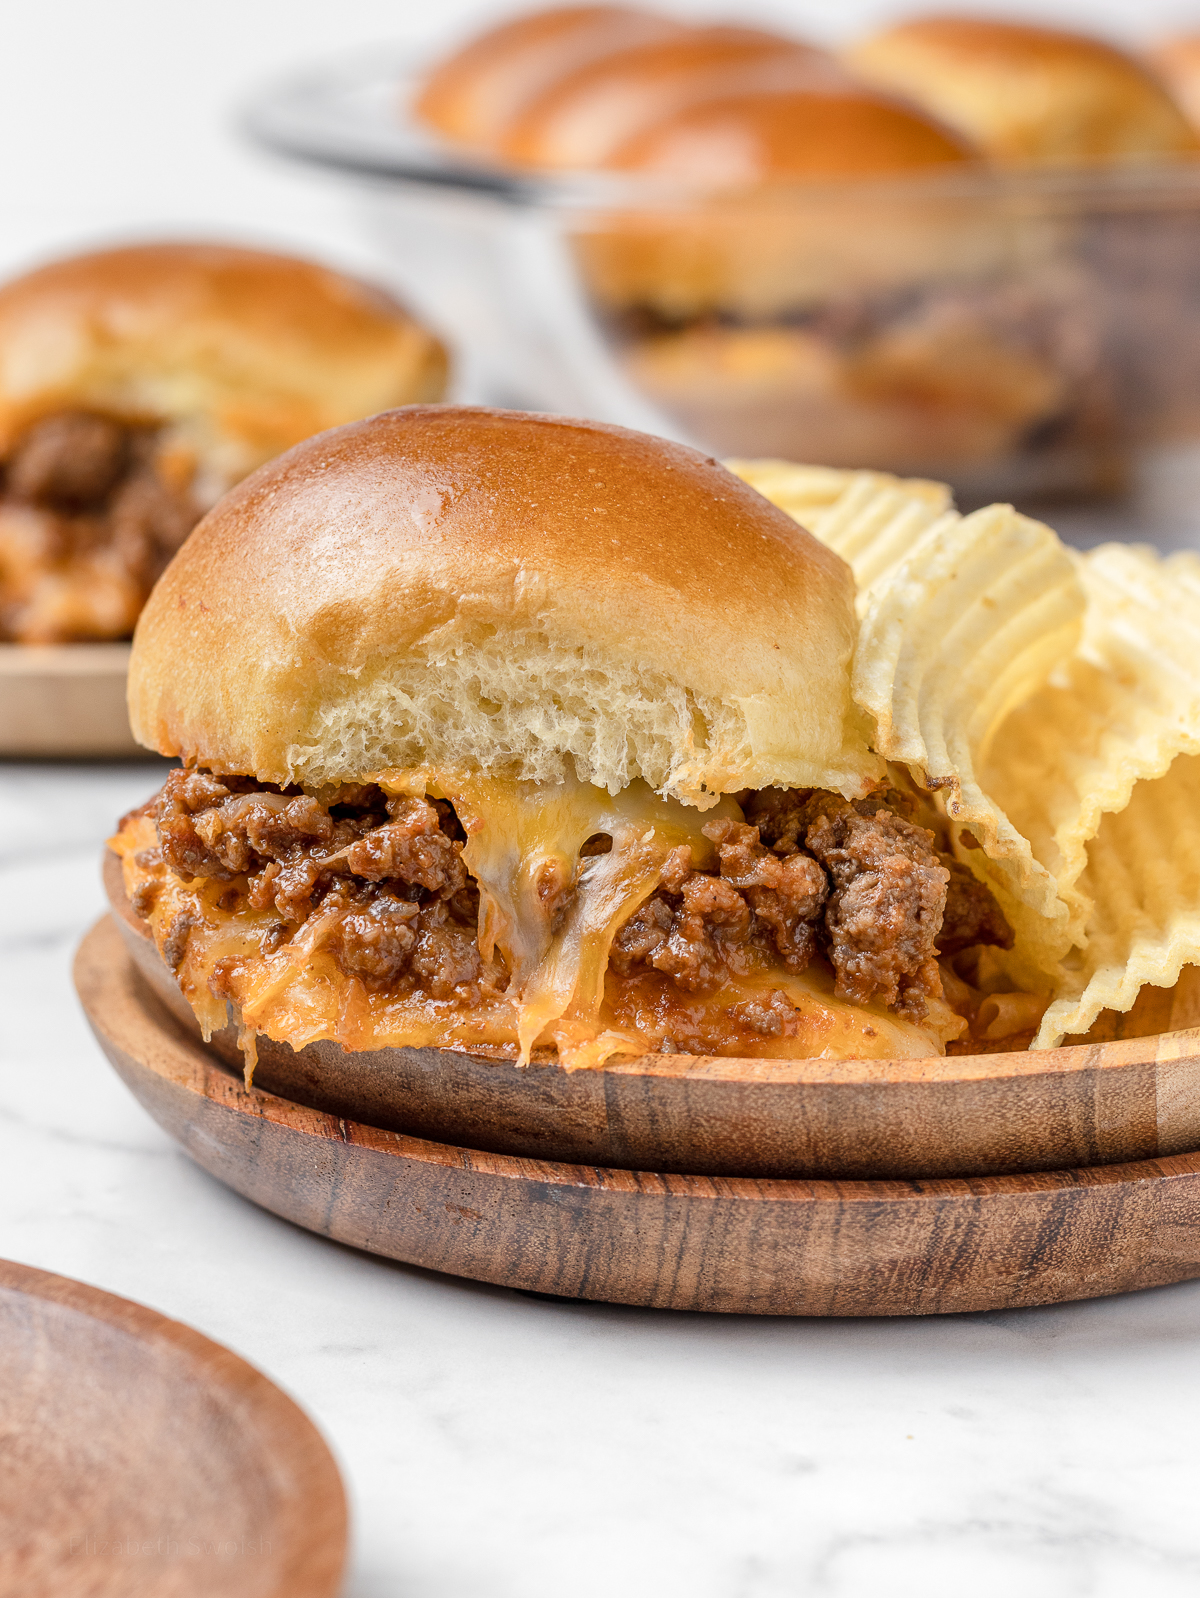 Sloppy Joe Slider on a plate with a side of chips.